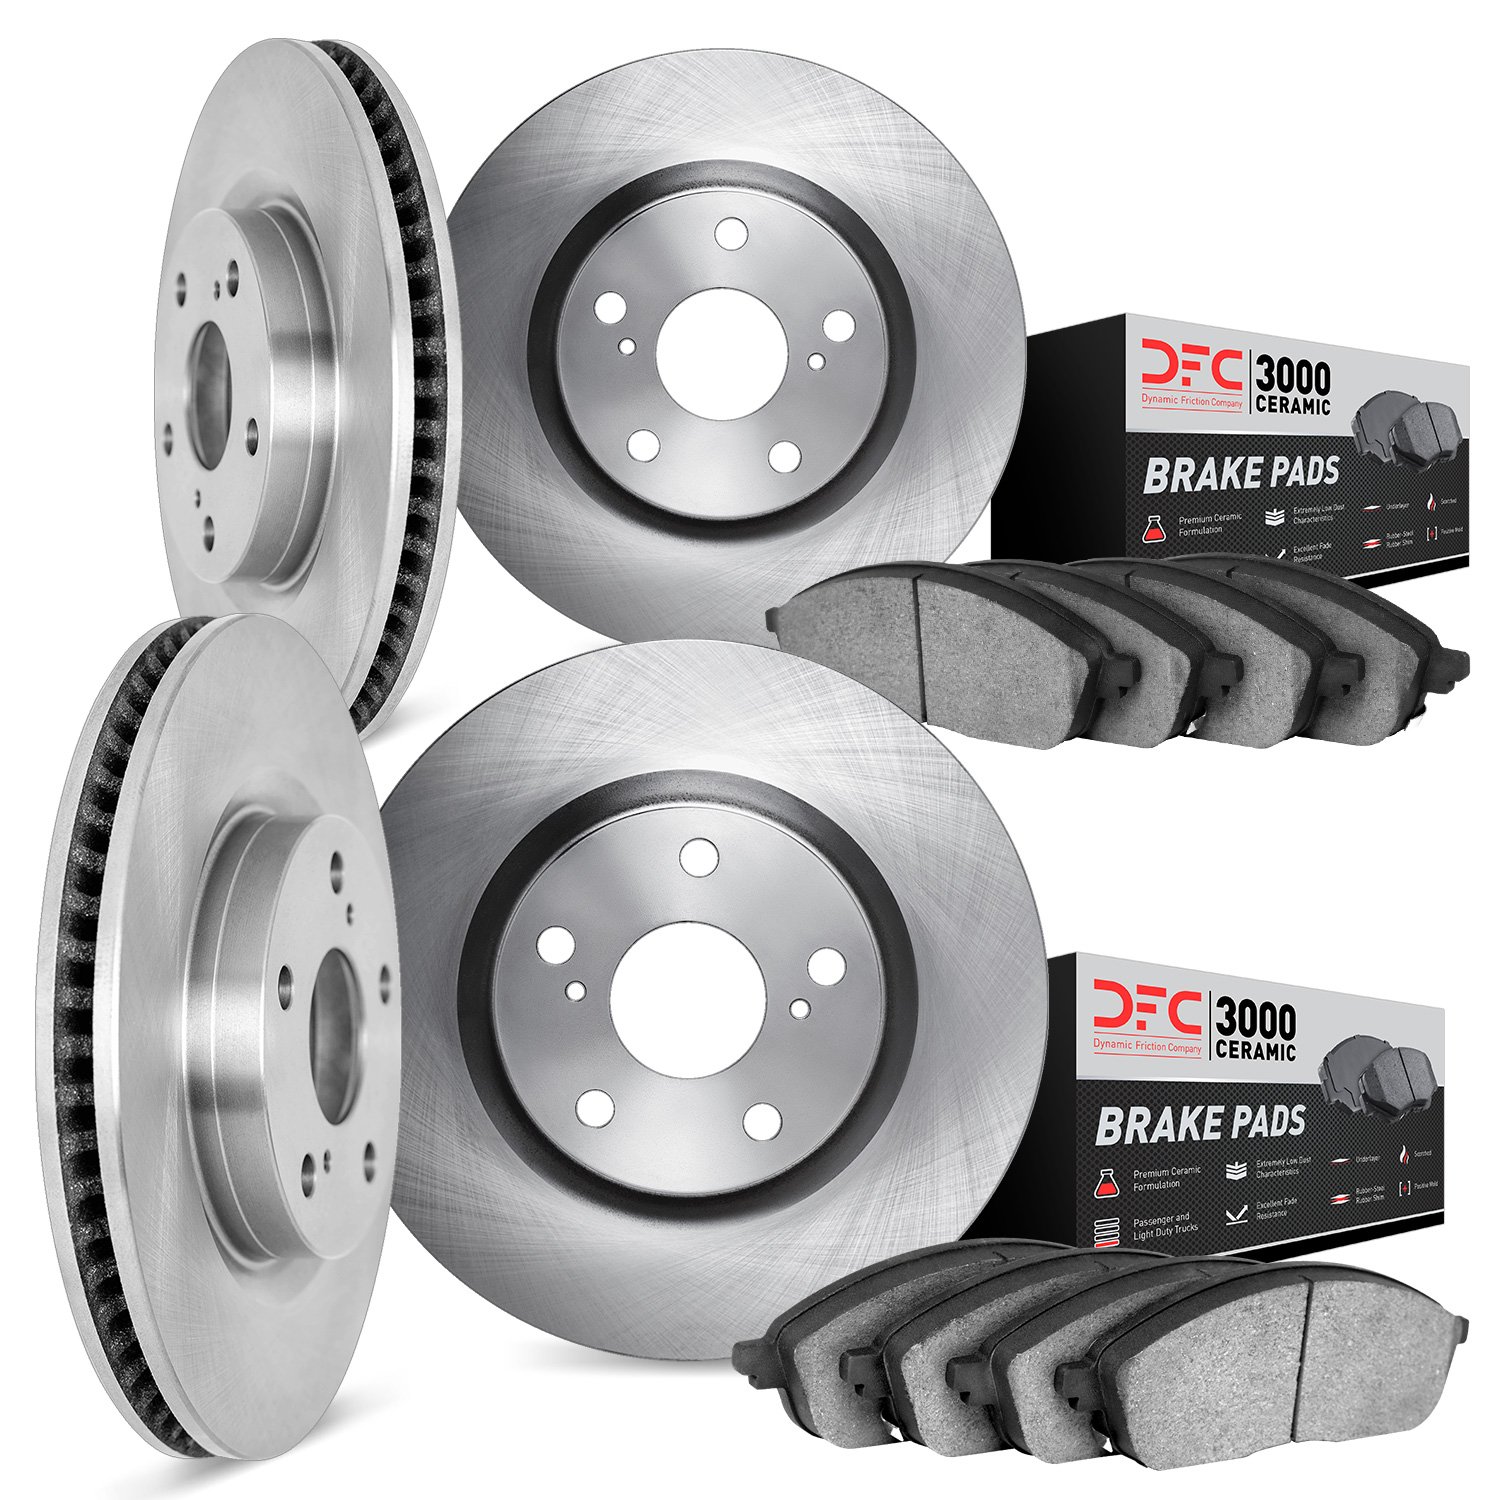 6304-73055 Brake Rotors with 3000-Series Ceramic Brake Pads Kit, 2004-2009 Audi/Volkswagen, Position: Front and Rear